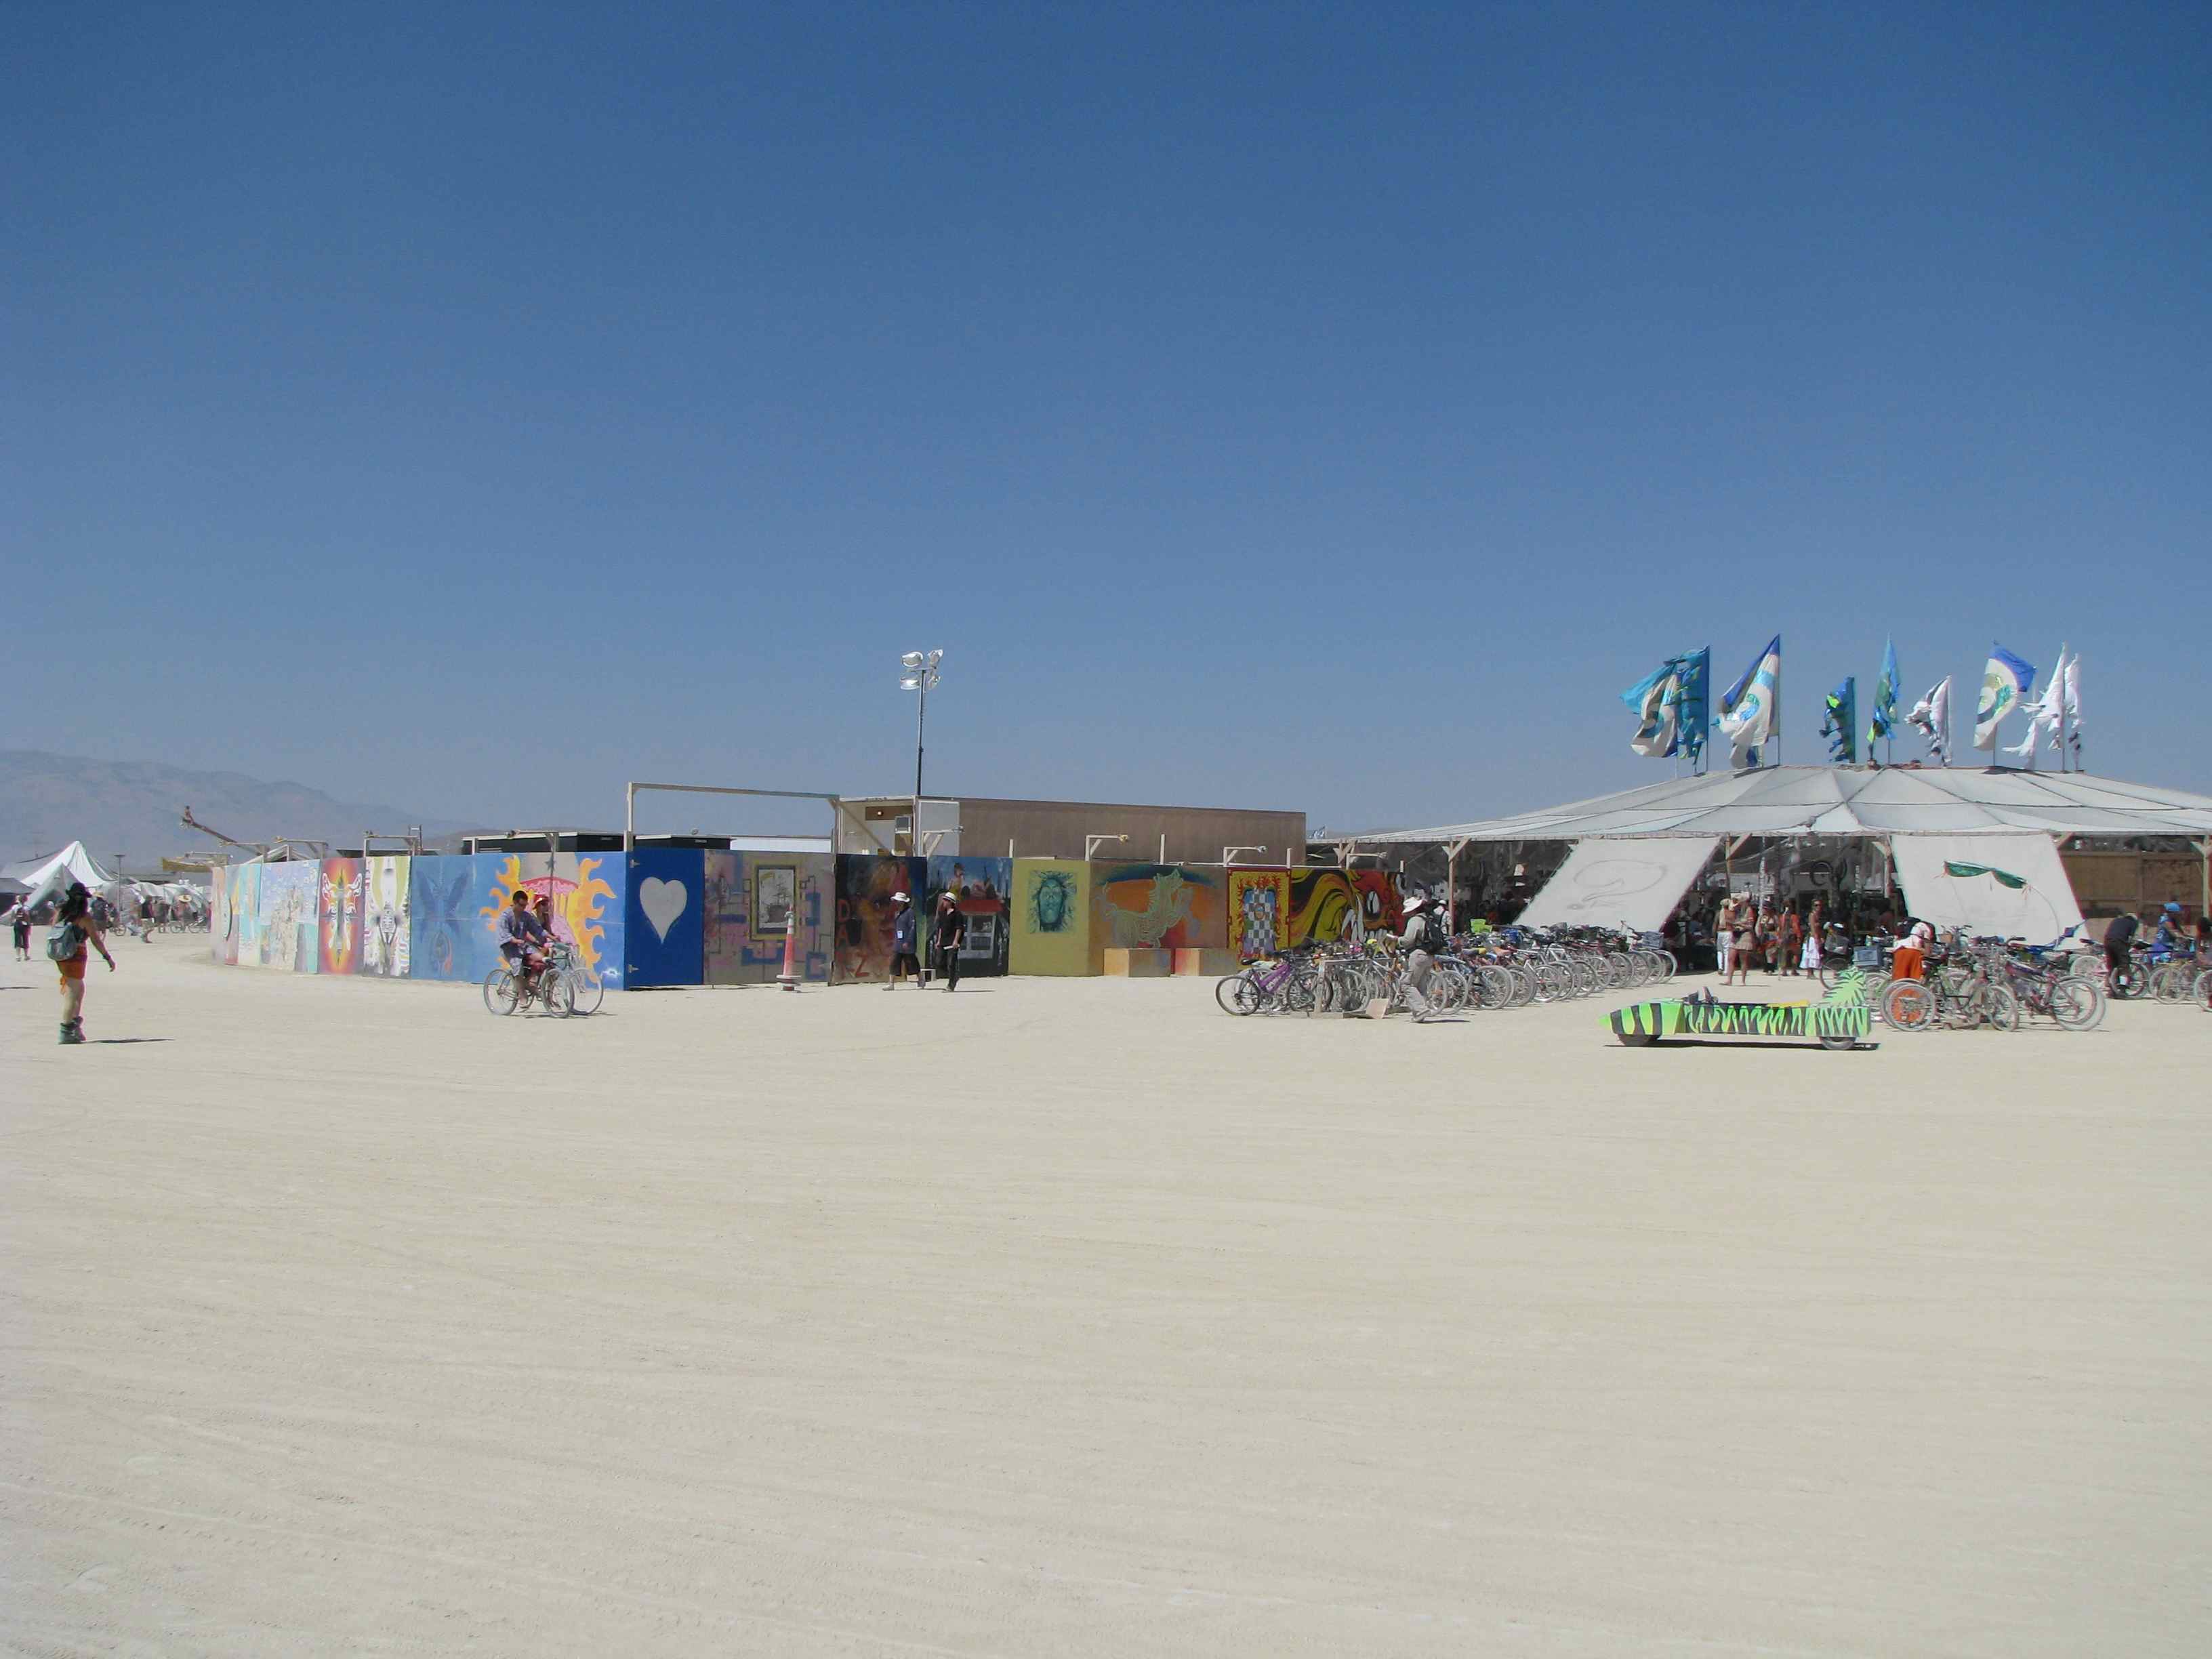 The outside of Center Camp-Burning Man 2011